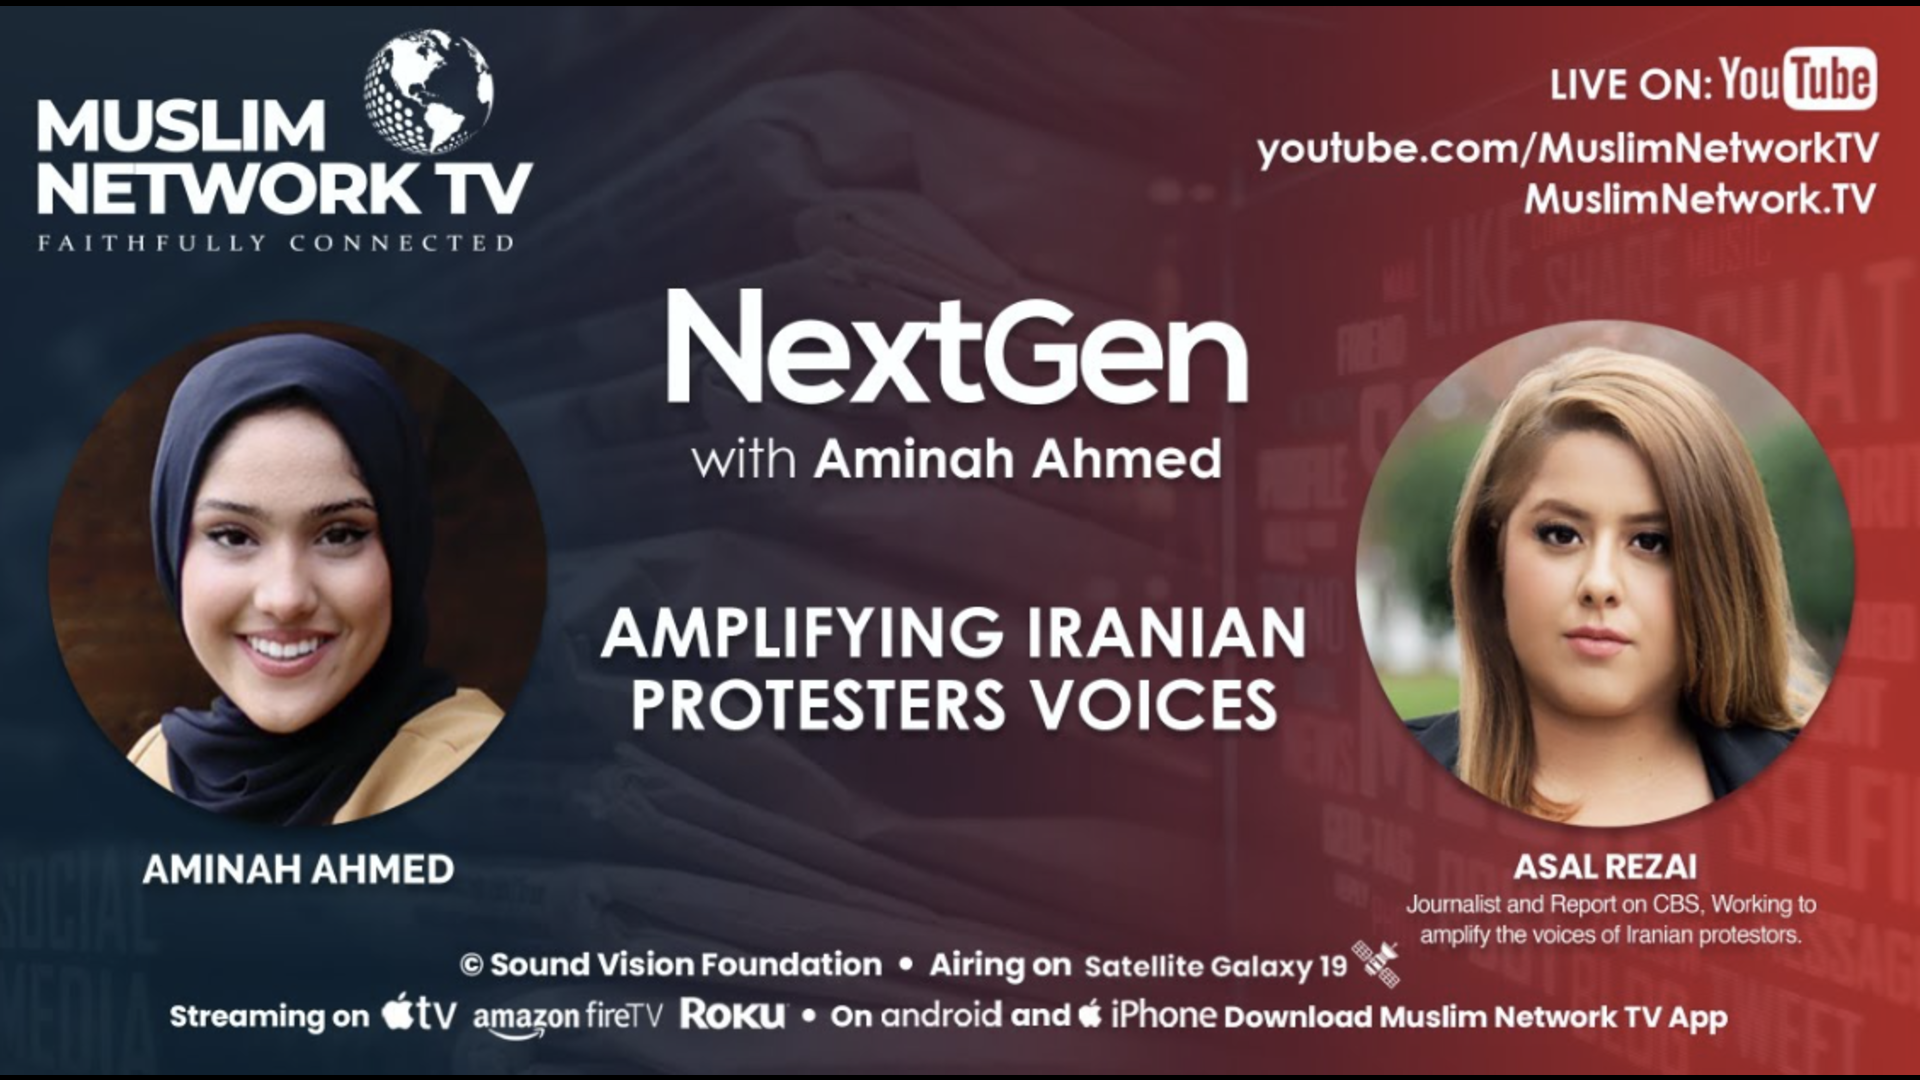 Amplifying Iranian Protesters Voices